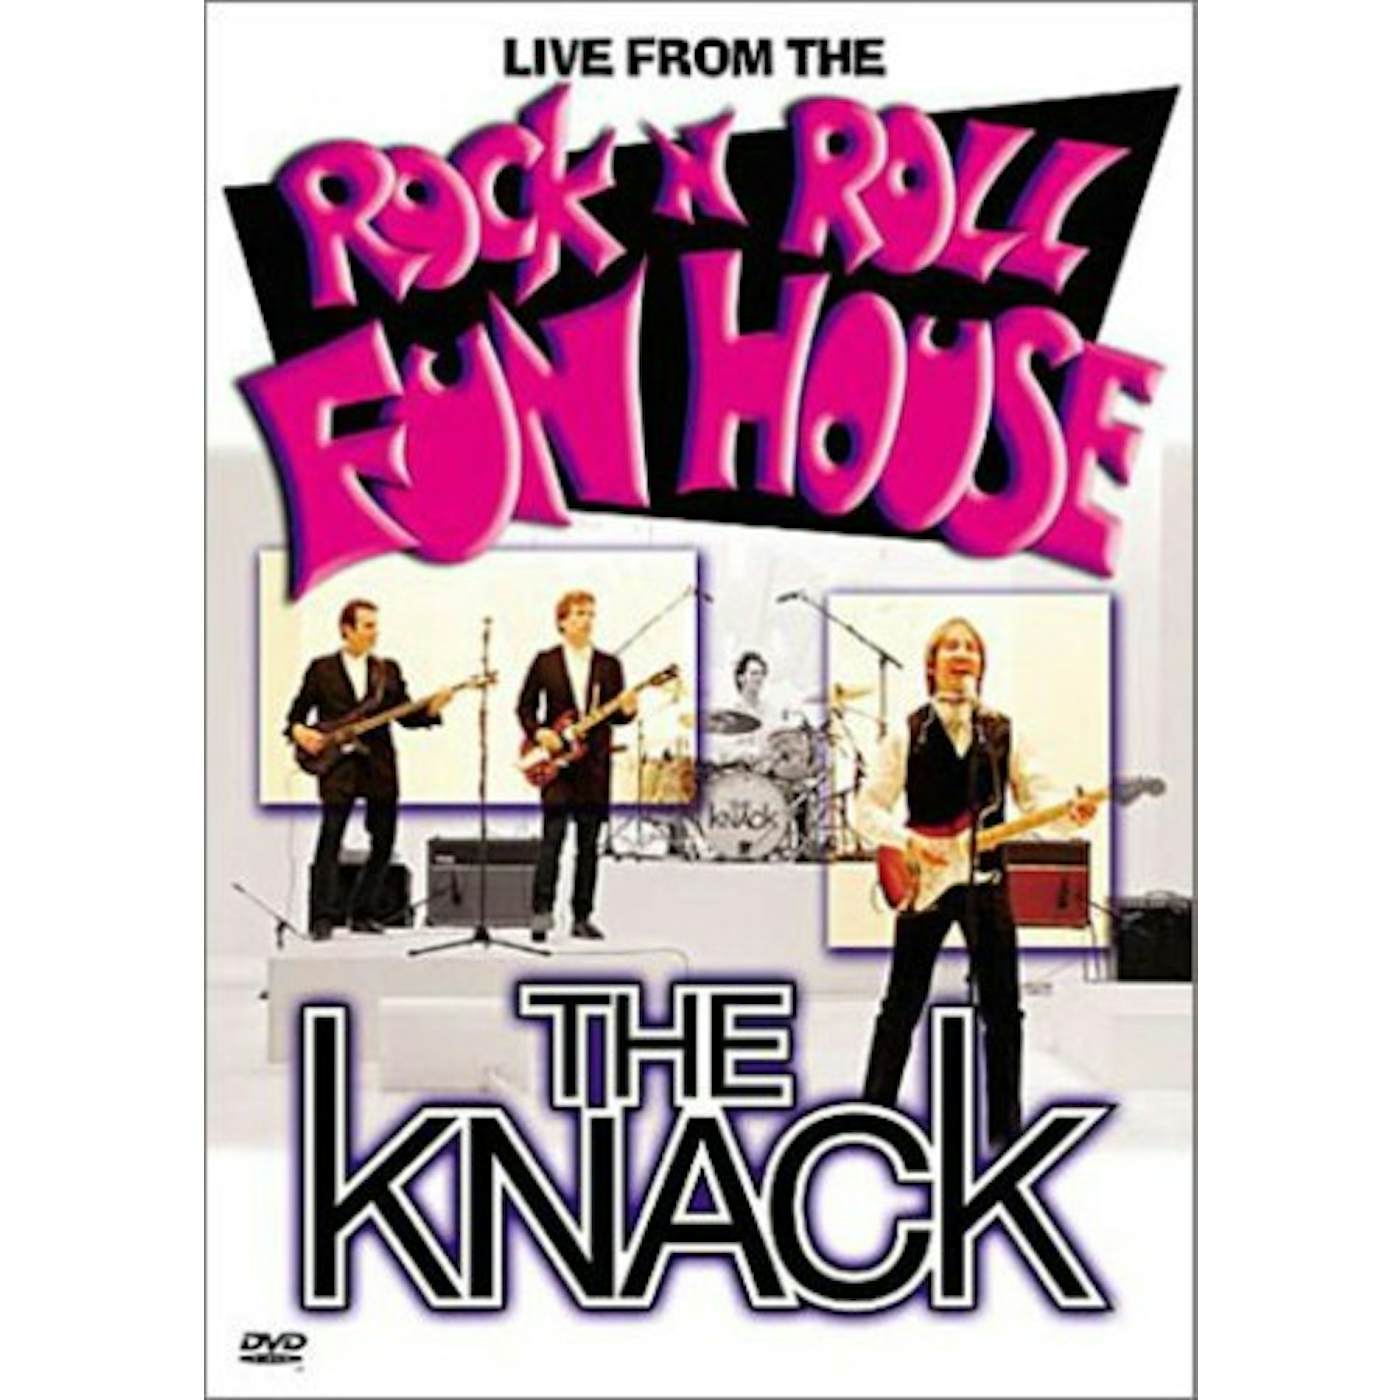 Knack LIVE FROM ROCK 'N' ROLL FUNHOUSE DVD